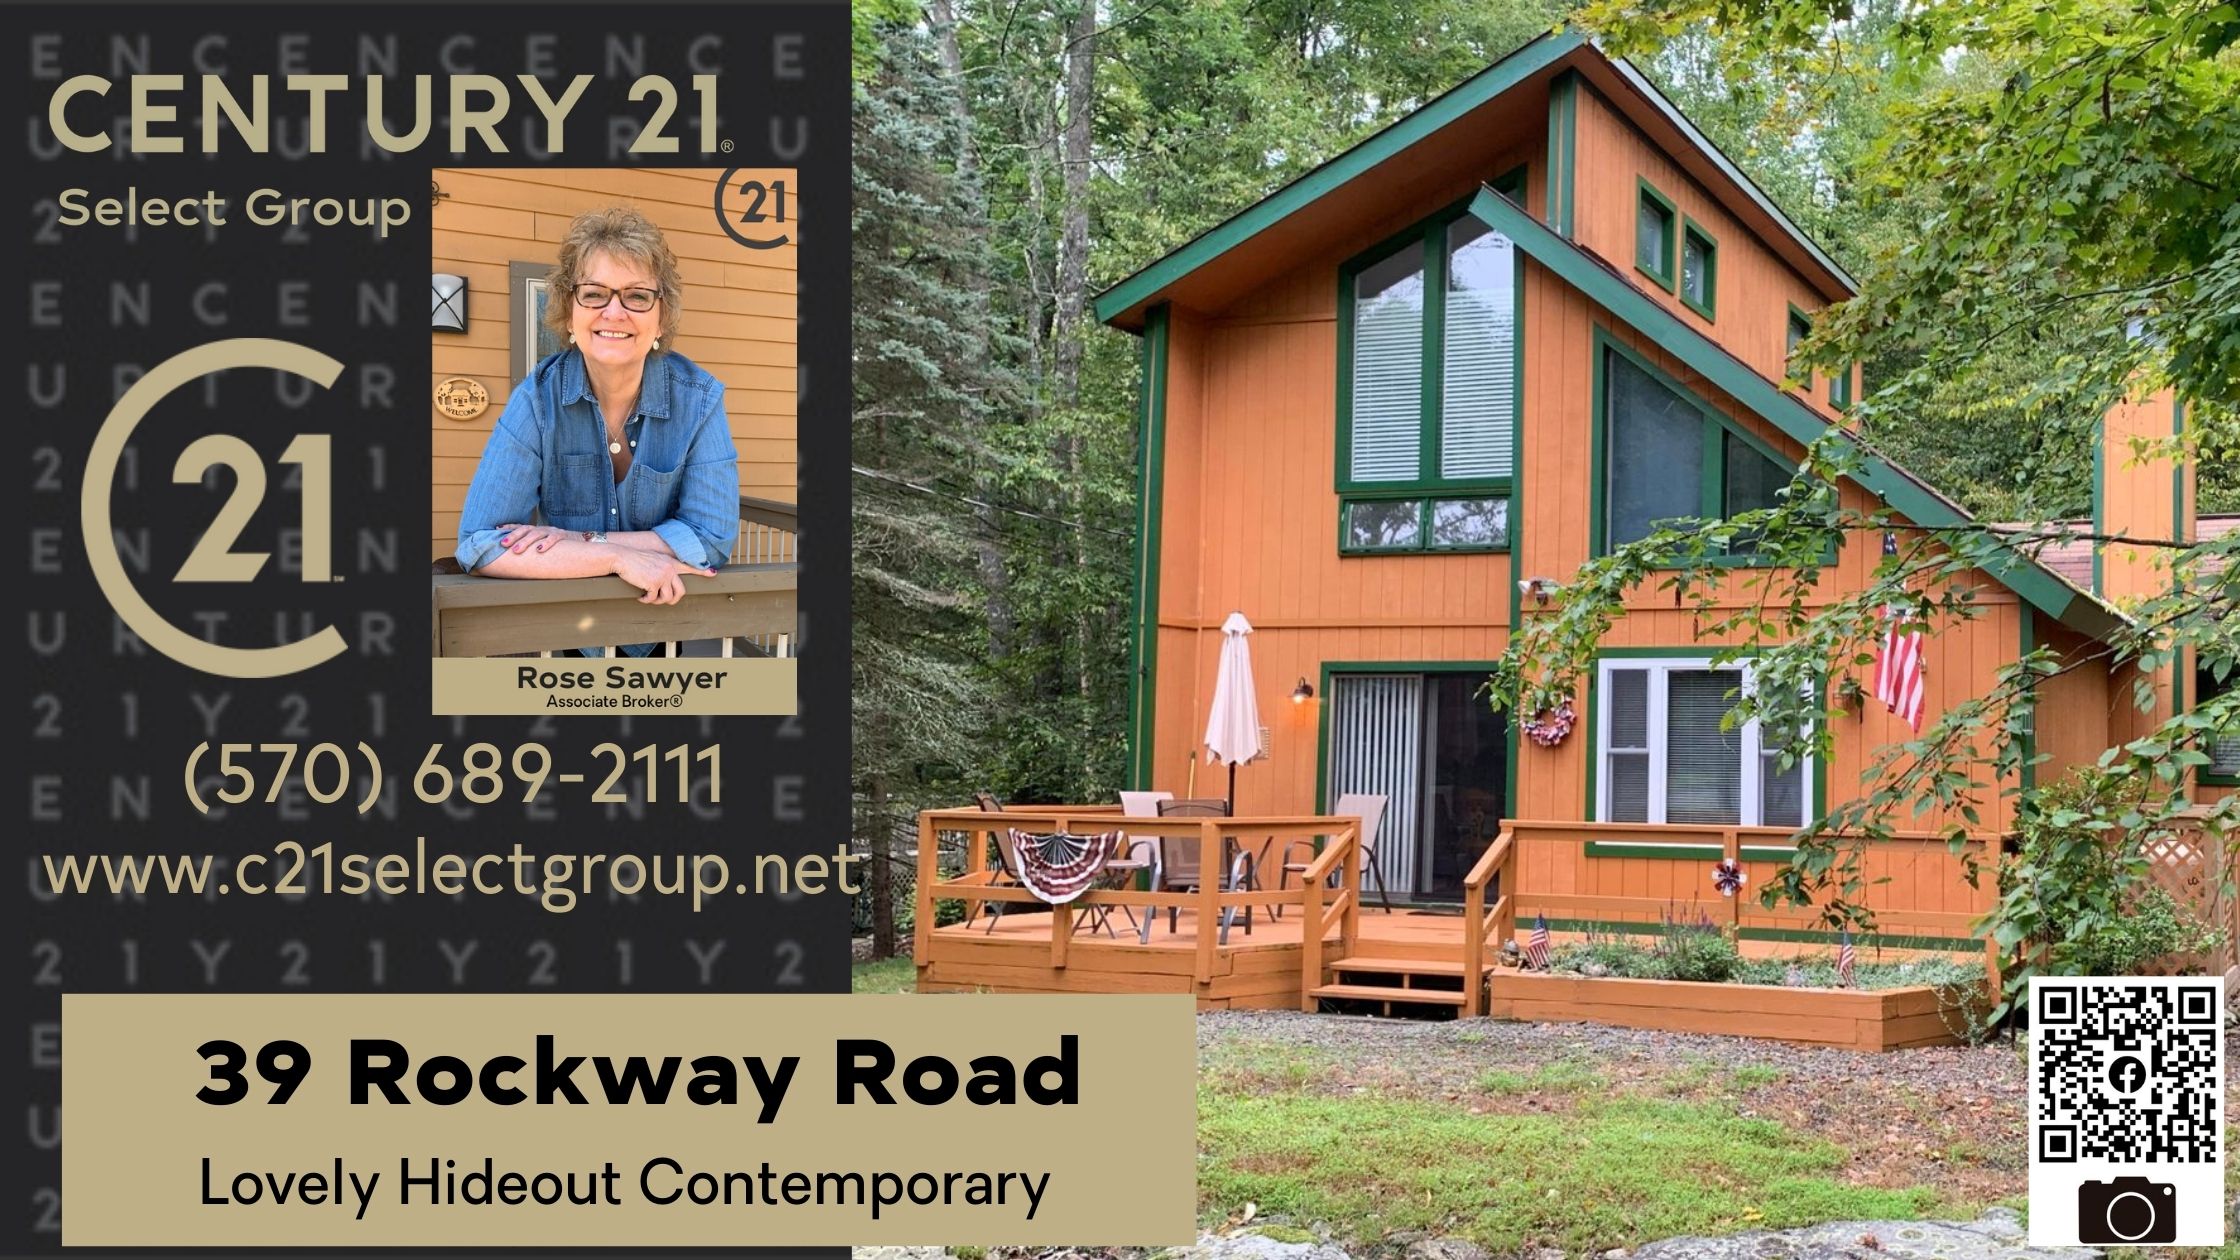 39 Rockway Road: Lovely Hideout Contemporary Home